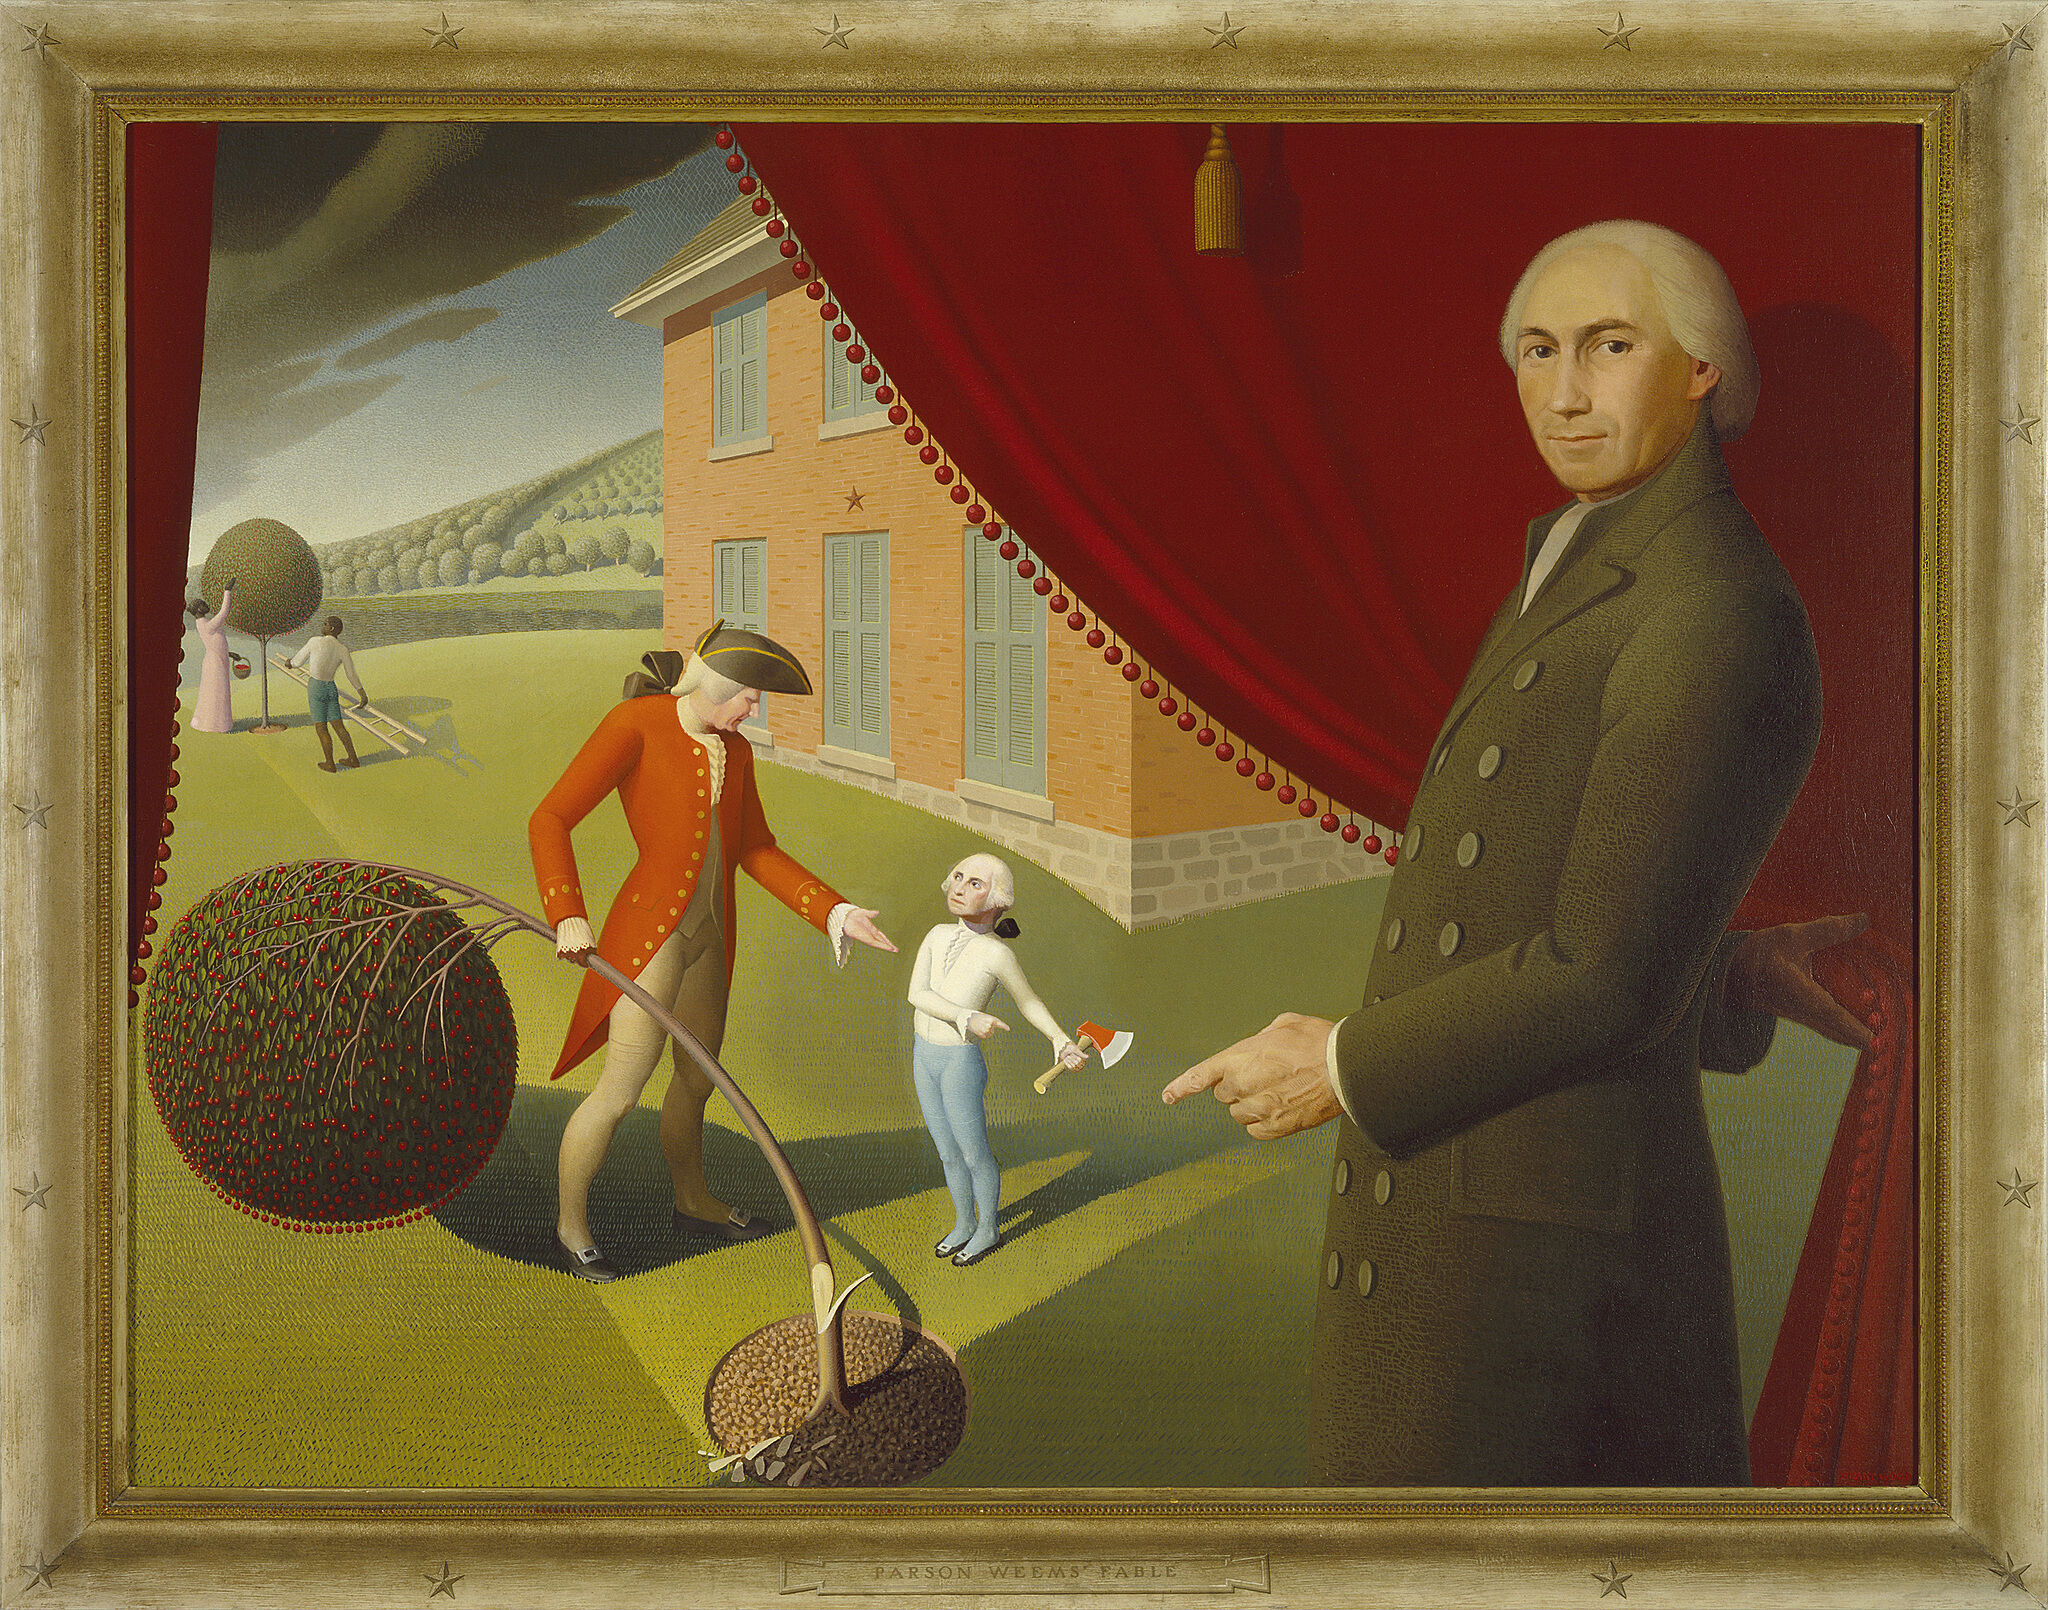 Depiction of fable in which young George Washington cuts down a cherry tree. 